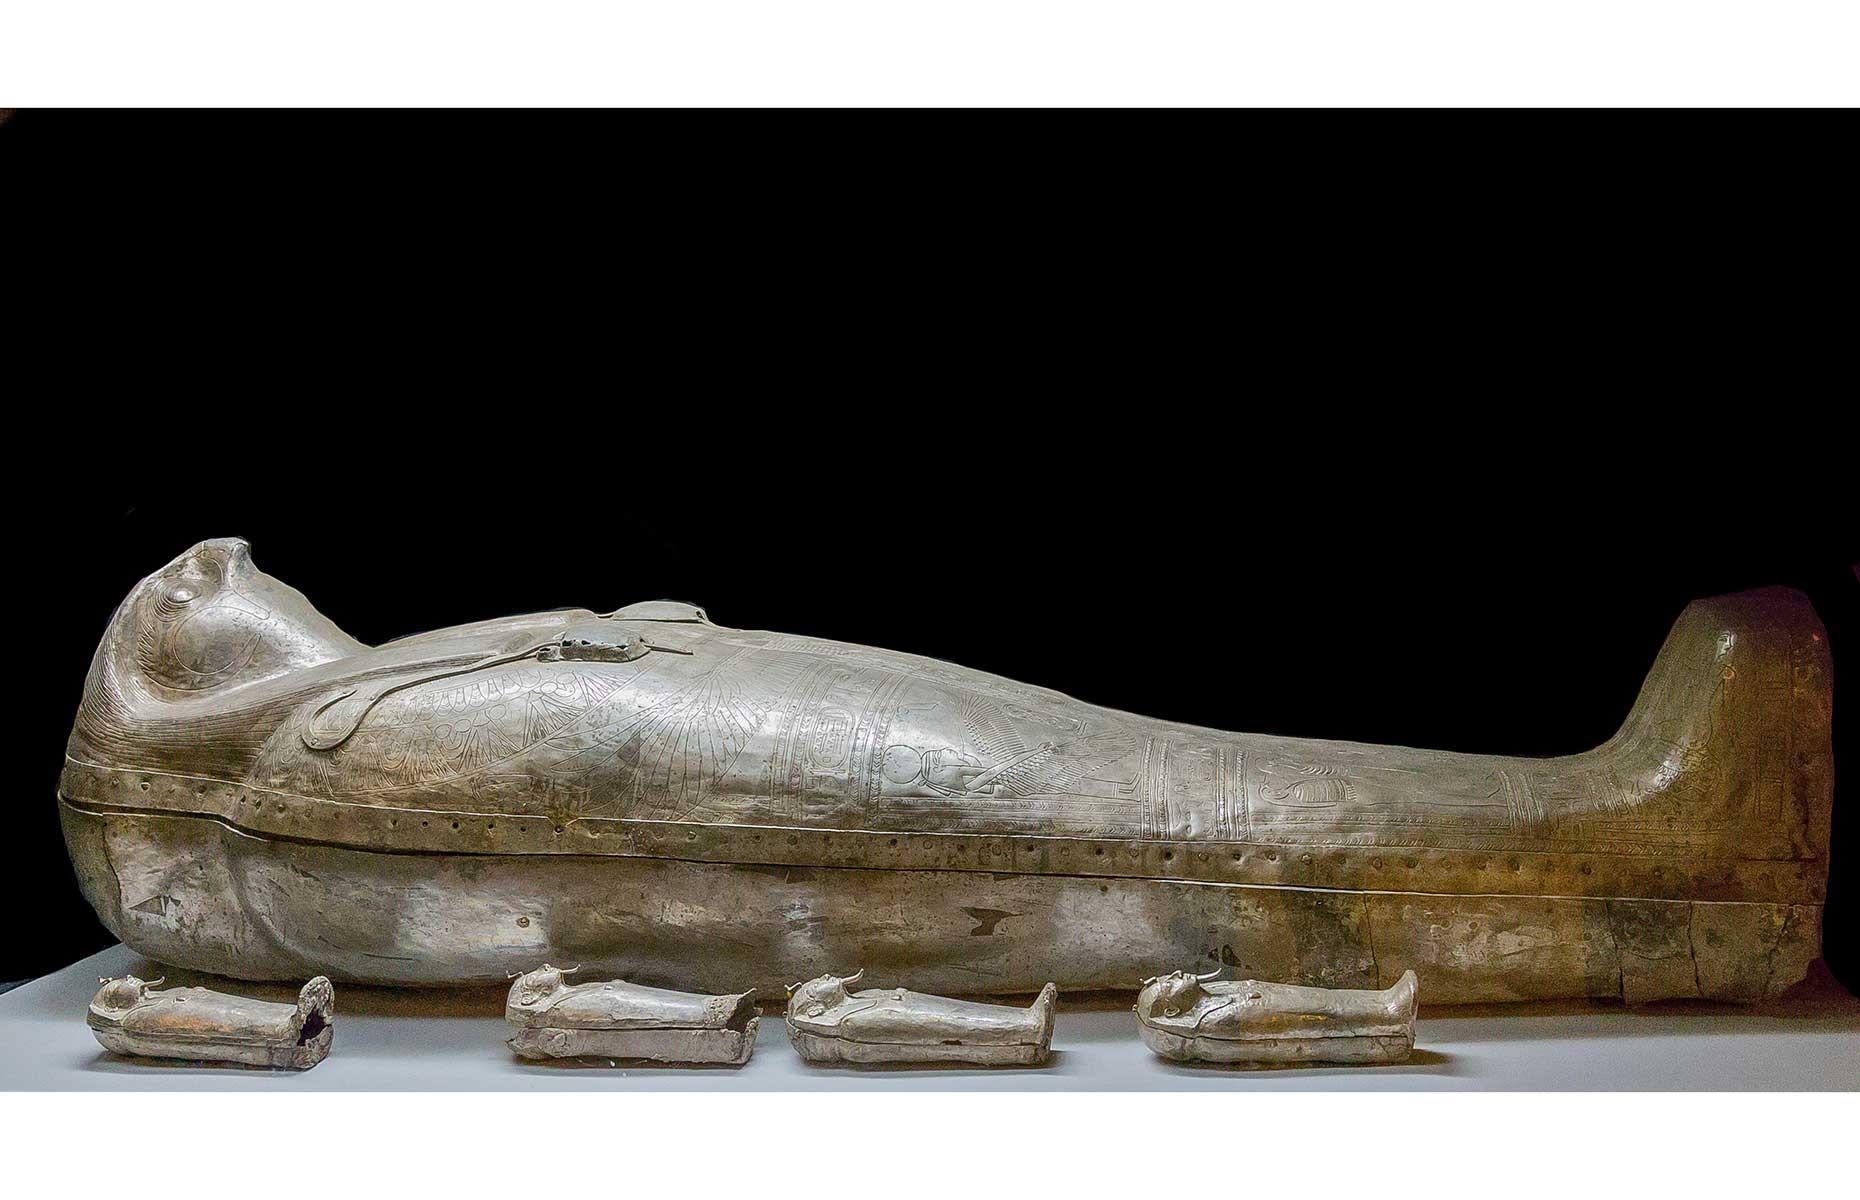 <p>This striking silver coffin is arguably the most famous of the Tanis Treasures. The priceless coffin contained the mummy of Shoshenq II, a 22nd Dynasty pharaoh <a href="http://www.touregypt.net/featurestories/sheshonqii.htm">unknown until Montet's discovery</a>. Unusually, the coffin uses a falcon instead of the king's head, and the miniatures surrounding his coffin contained his organs – a stark contrast to the canopic jars more commonly used.</p>  <p><a href="https://www.loveexploring.com/galleries/155662/the-secrets-and-mysteries-of-stonehenge?page=1"><strong>Discover the secrets of Stonehenge</strong></a></p>